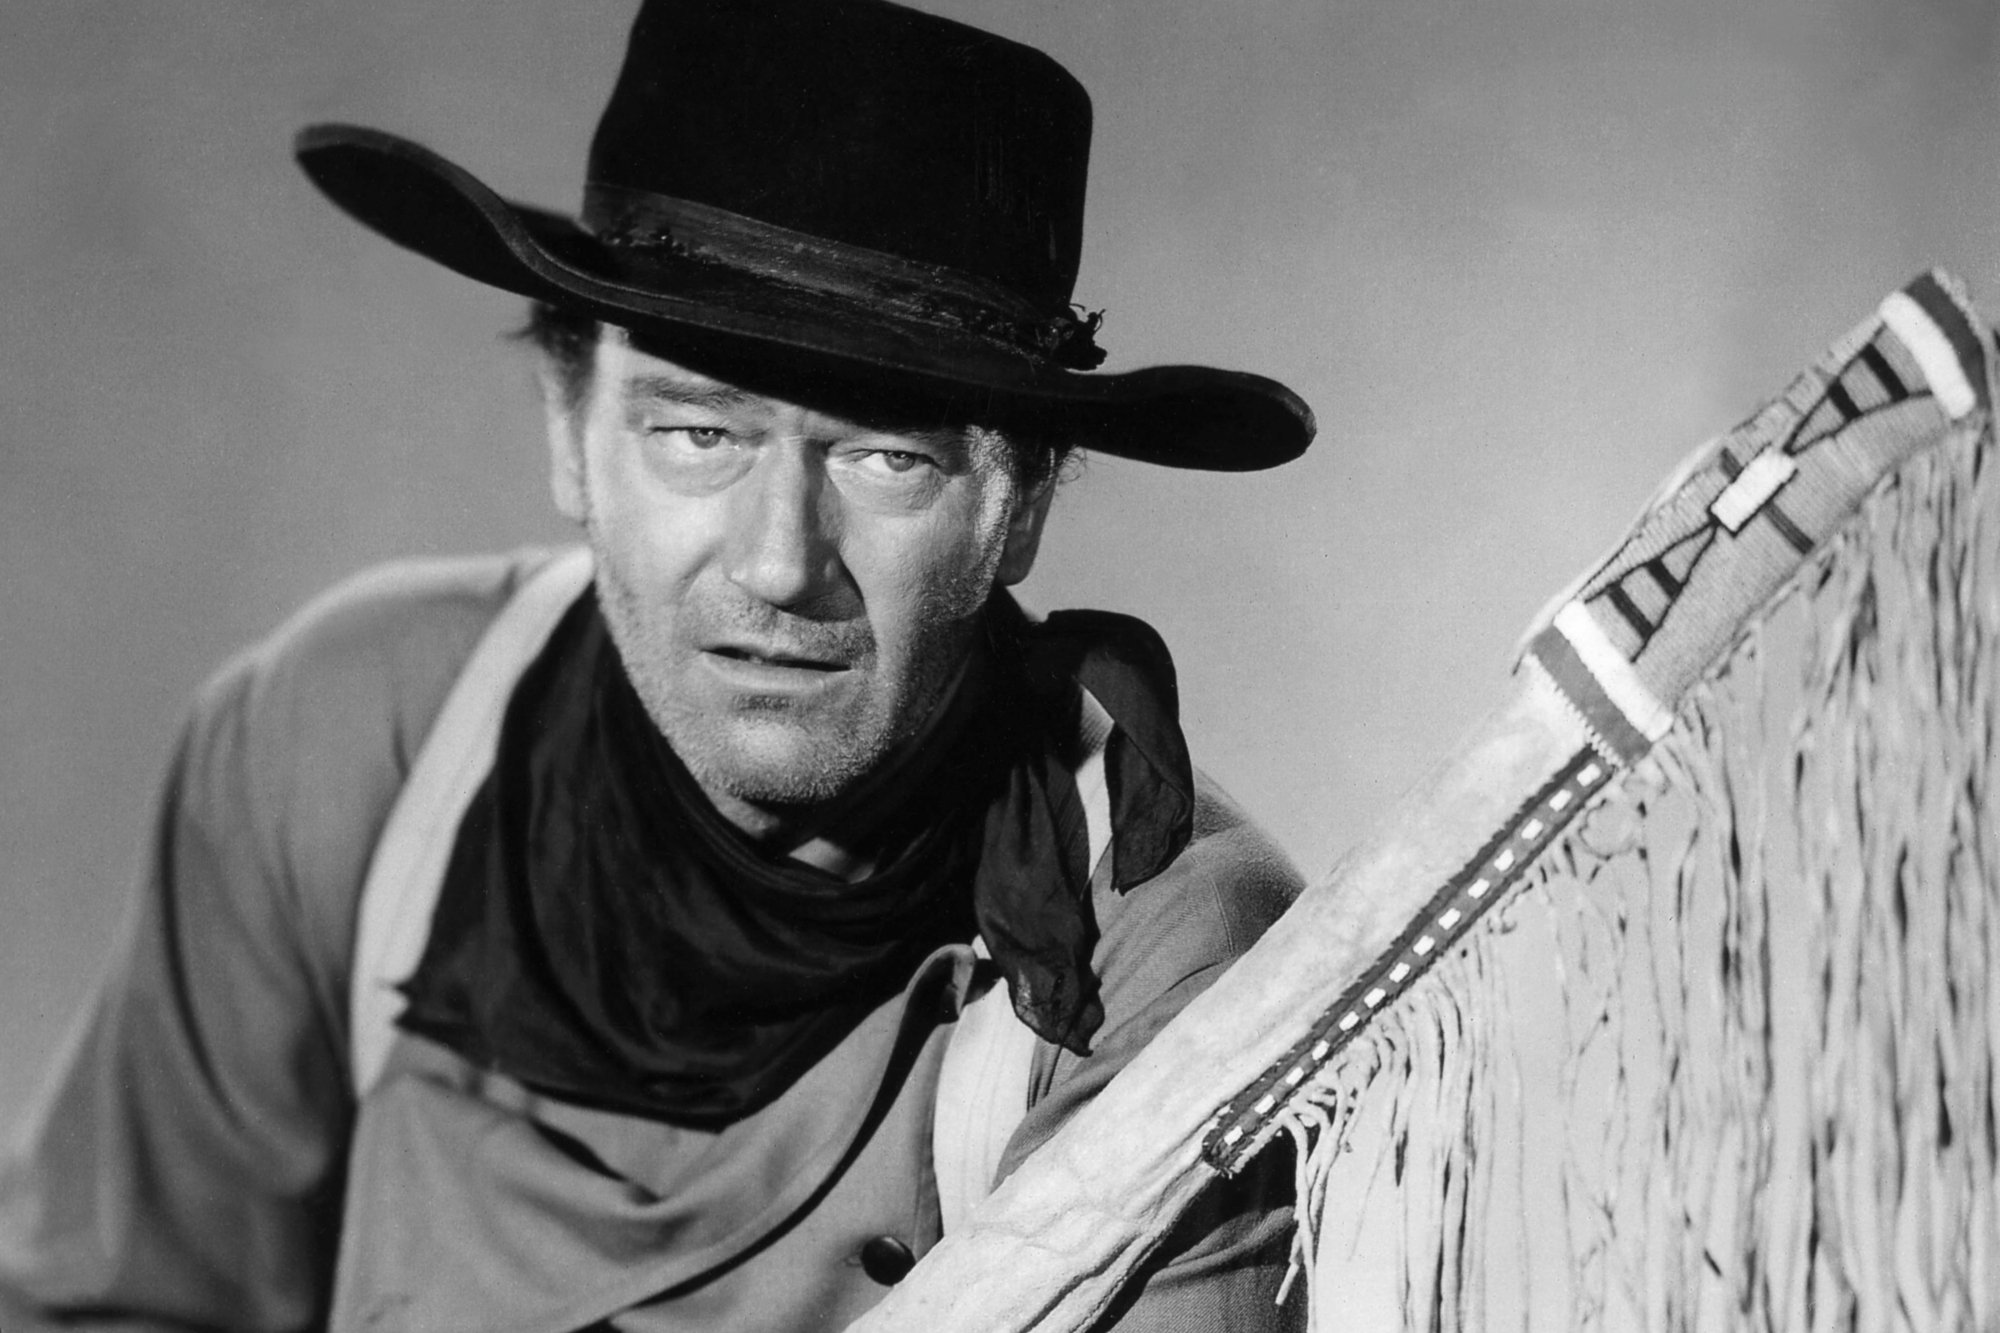 'The Searchers' John Wayne as Ethan Edwards, whose performance Clint Eastwood called 'brilliant' in a black-and-white photo wearing a Western costume